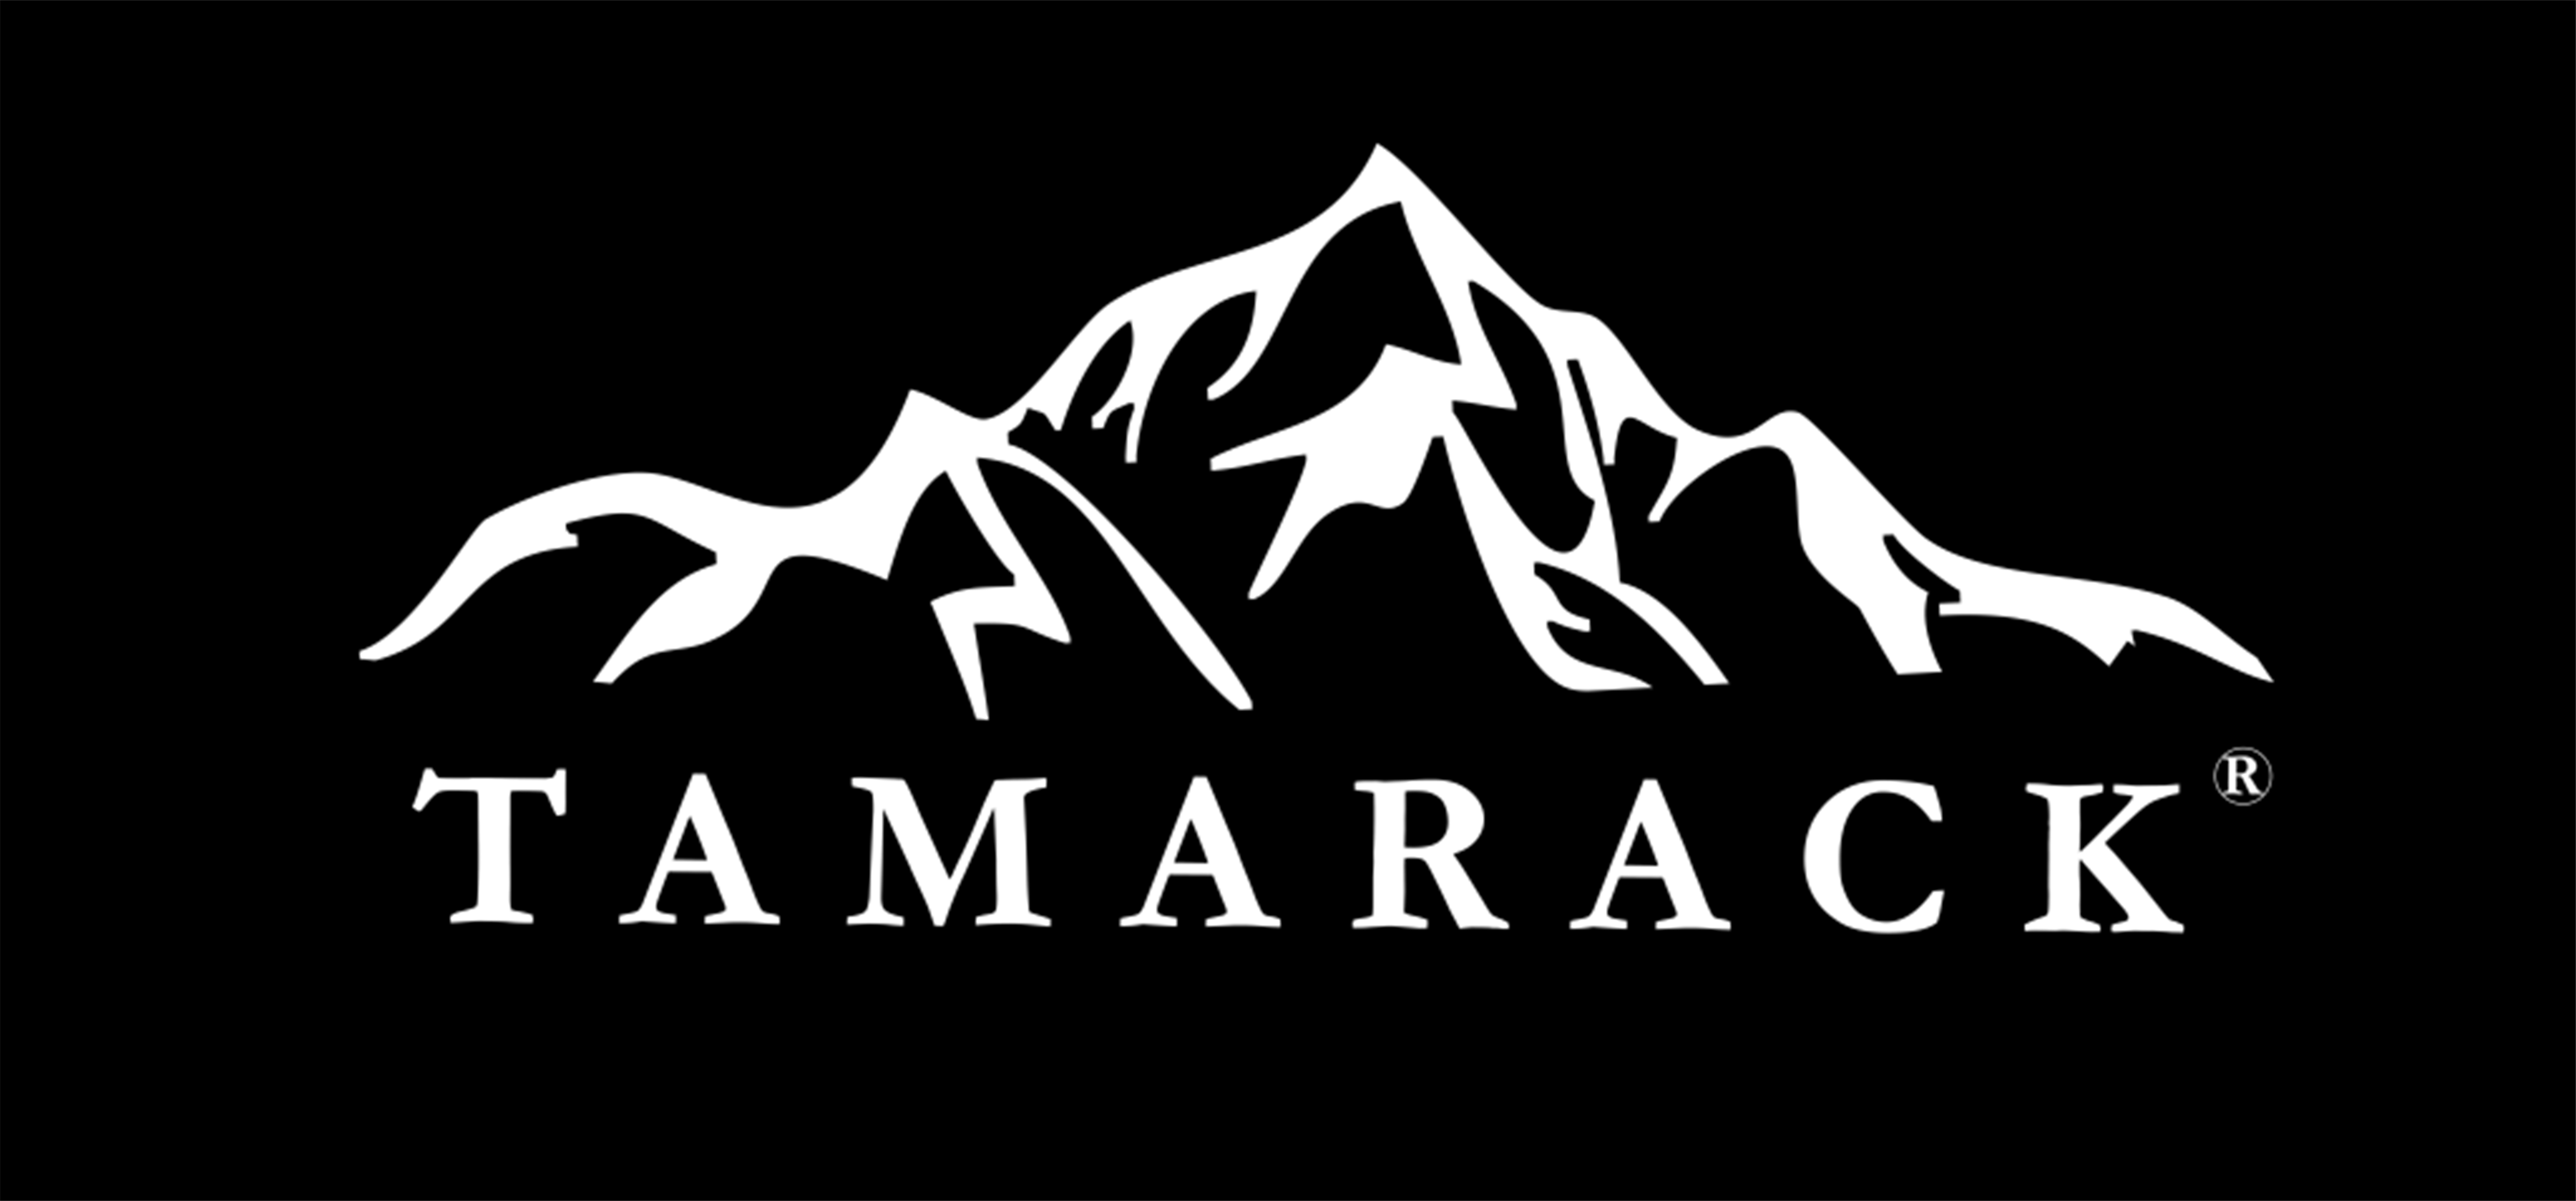 Tamarack Outfitters